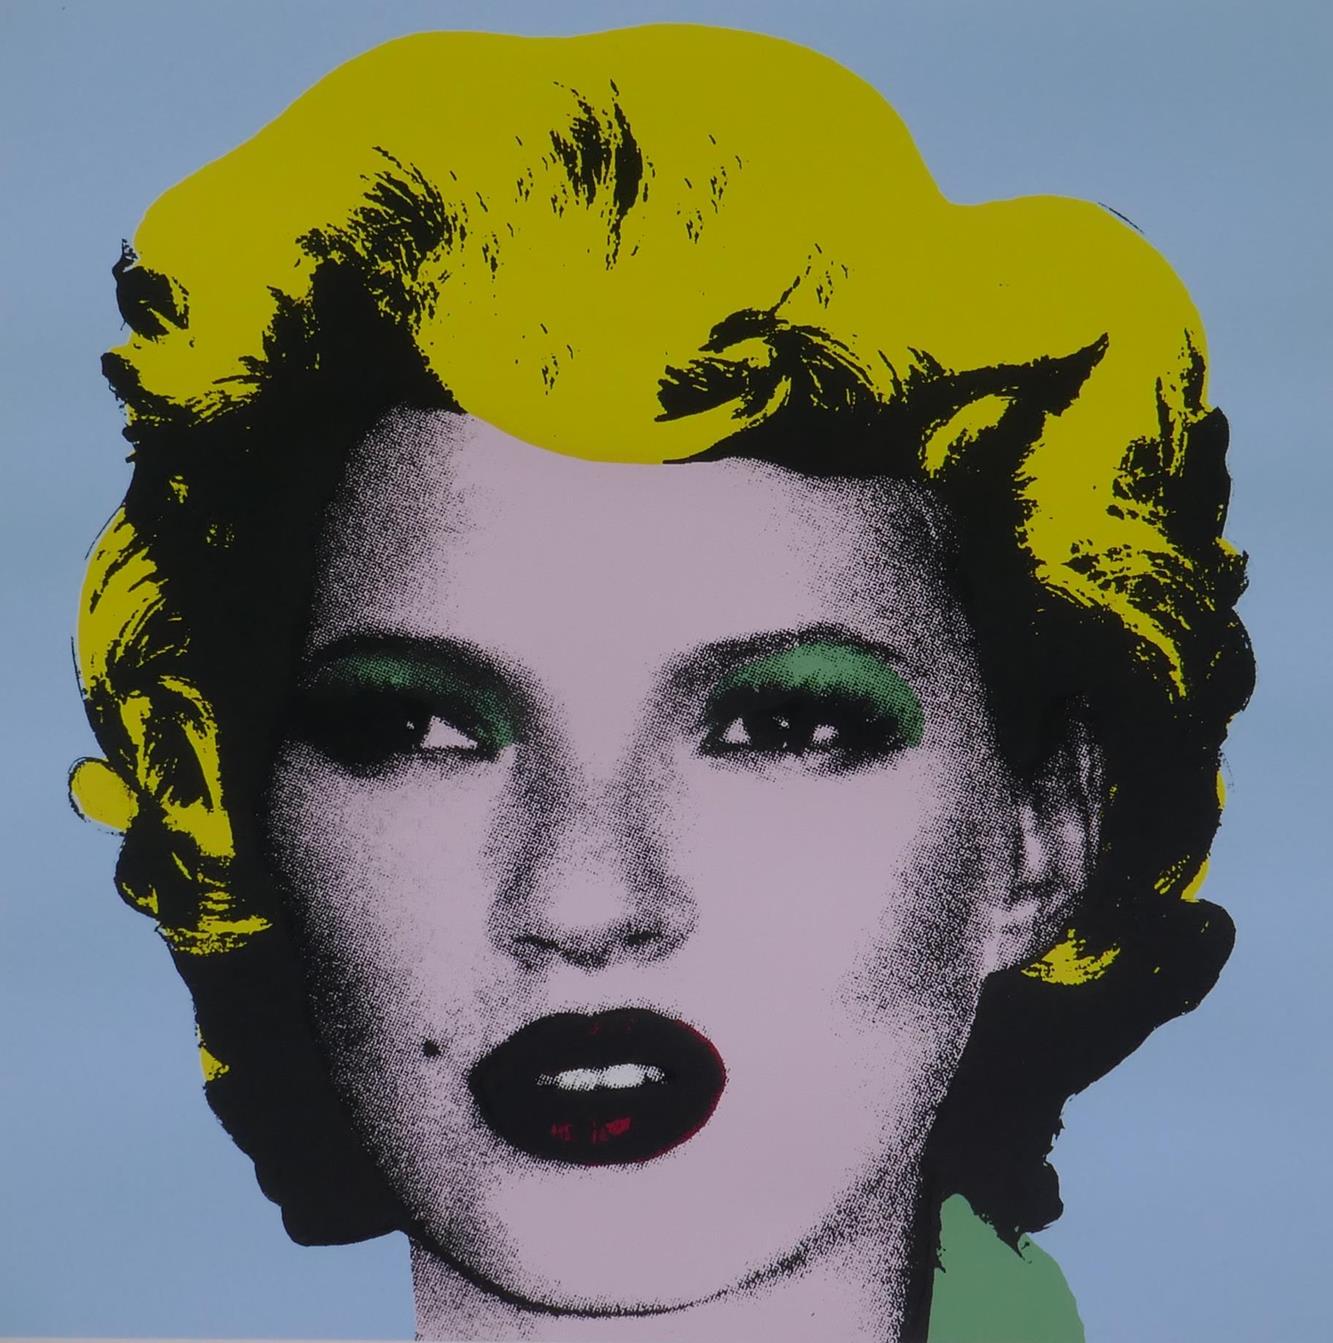 After Banksy, Kate Moss, limited edition copy screen print No 290/500, by the West Country Prince,